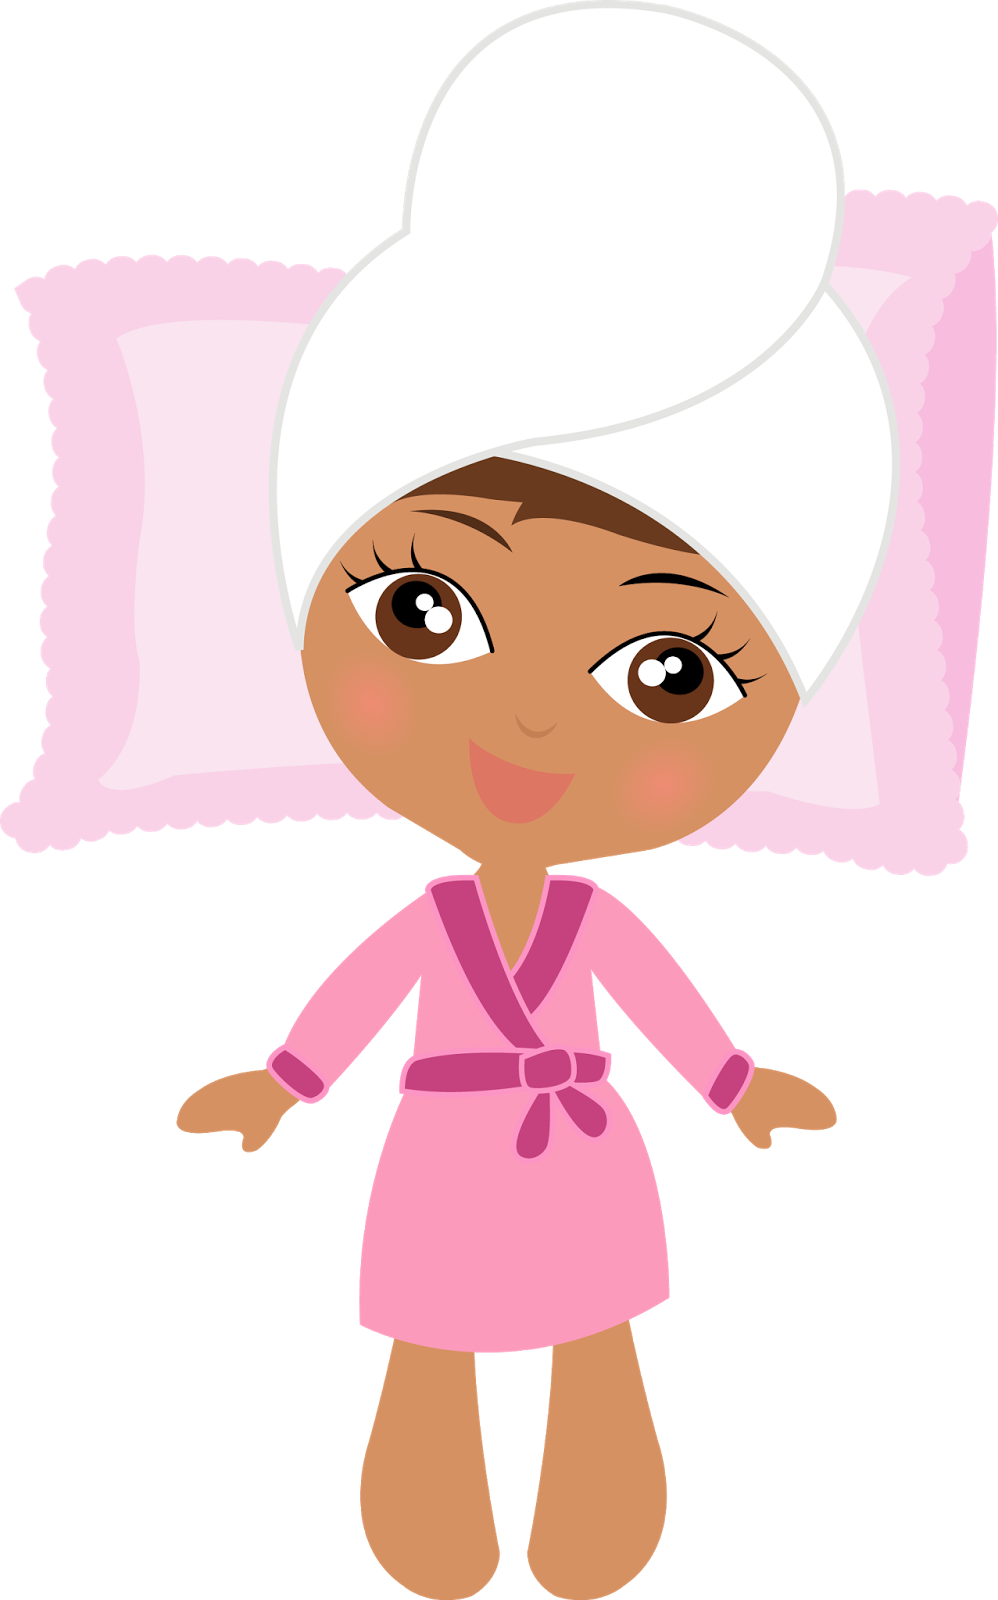 Spa Party Clip Art Oh My Fiesta For Ladies